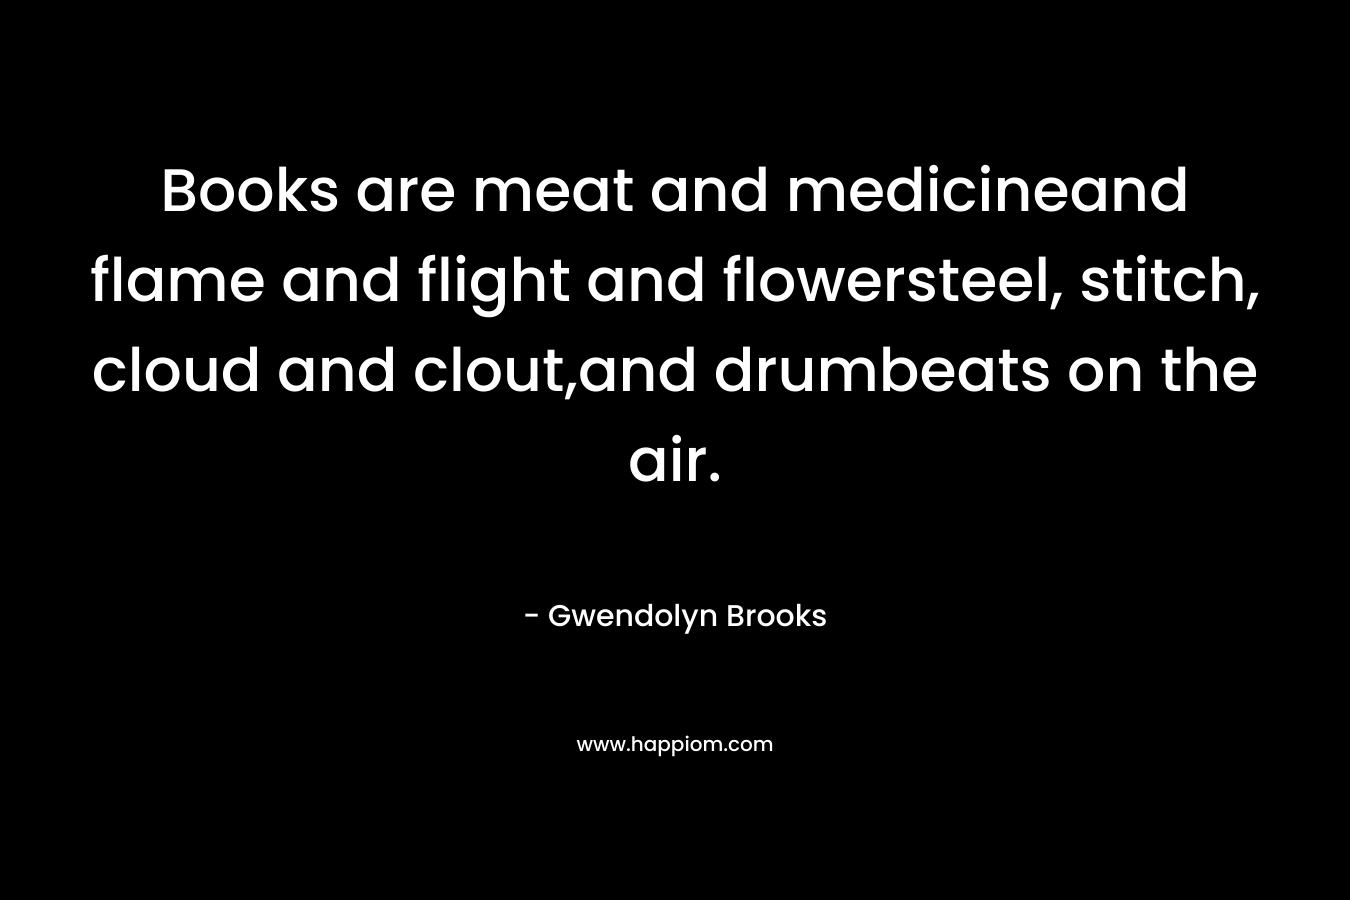 Books are meat and medicineand flame and flight and flowersteel, stitch, cloud and clout,and drumbeats on the air.